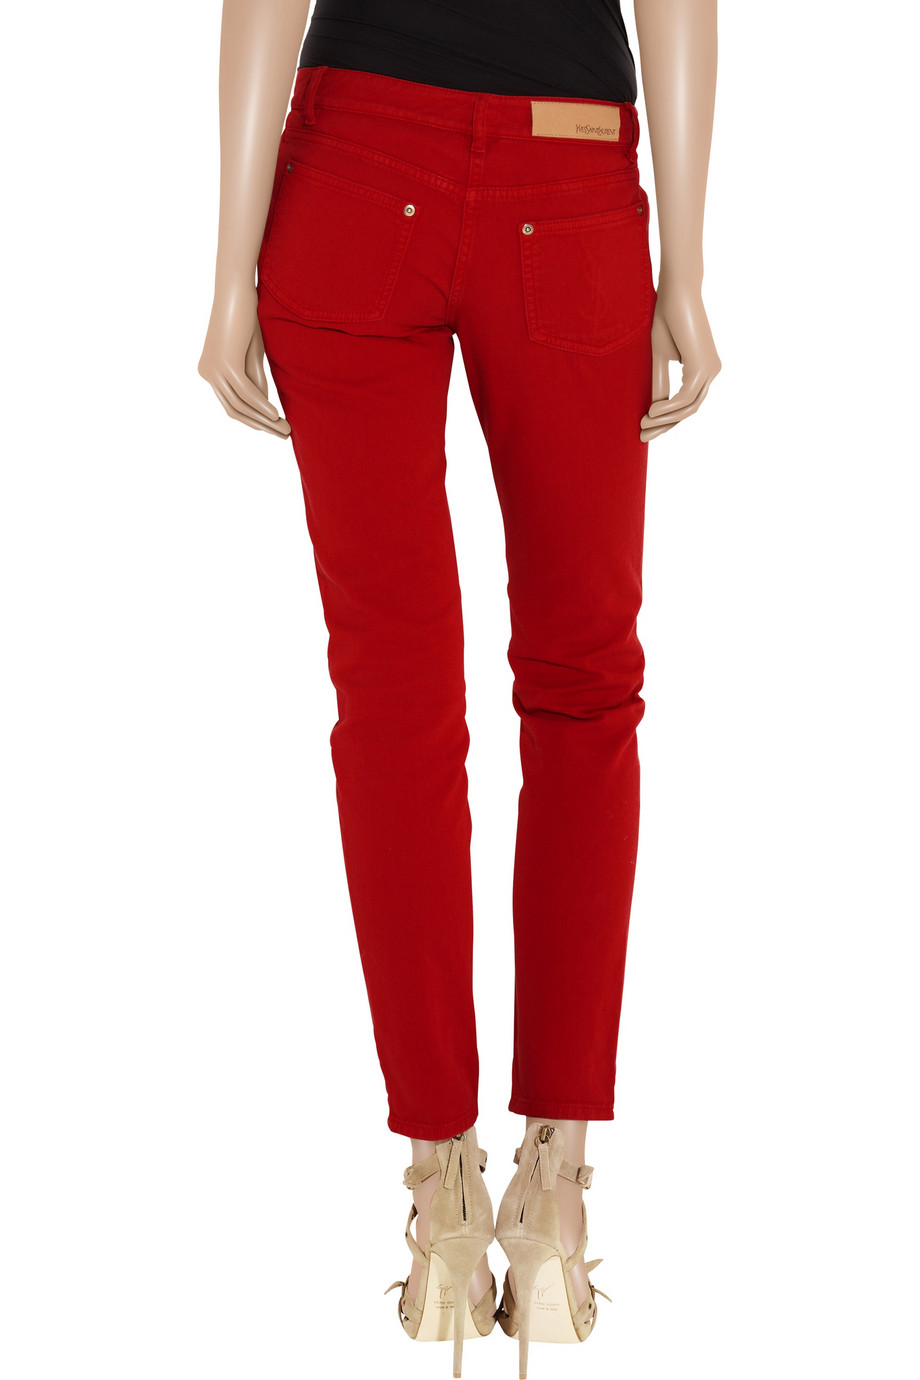 Saint Laurent Mid-Rise Skinny Jeans in Ruby (Red) - Lyst